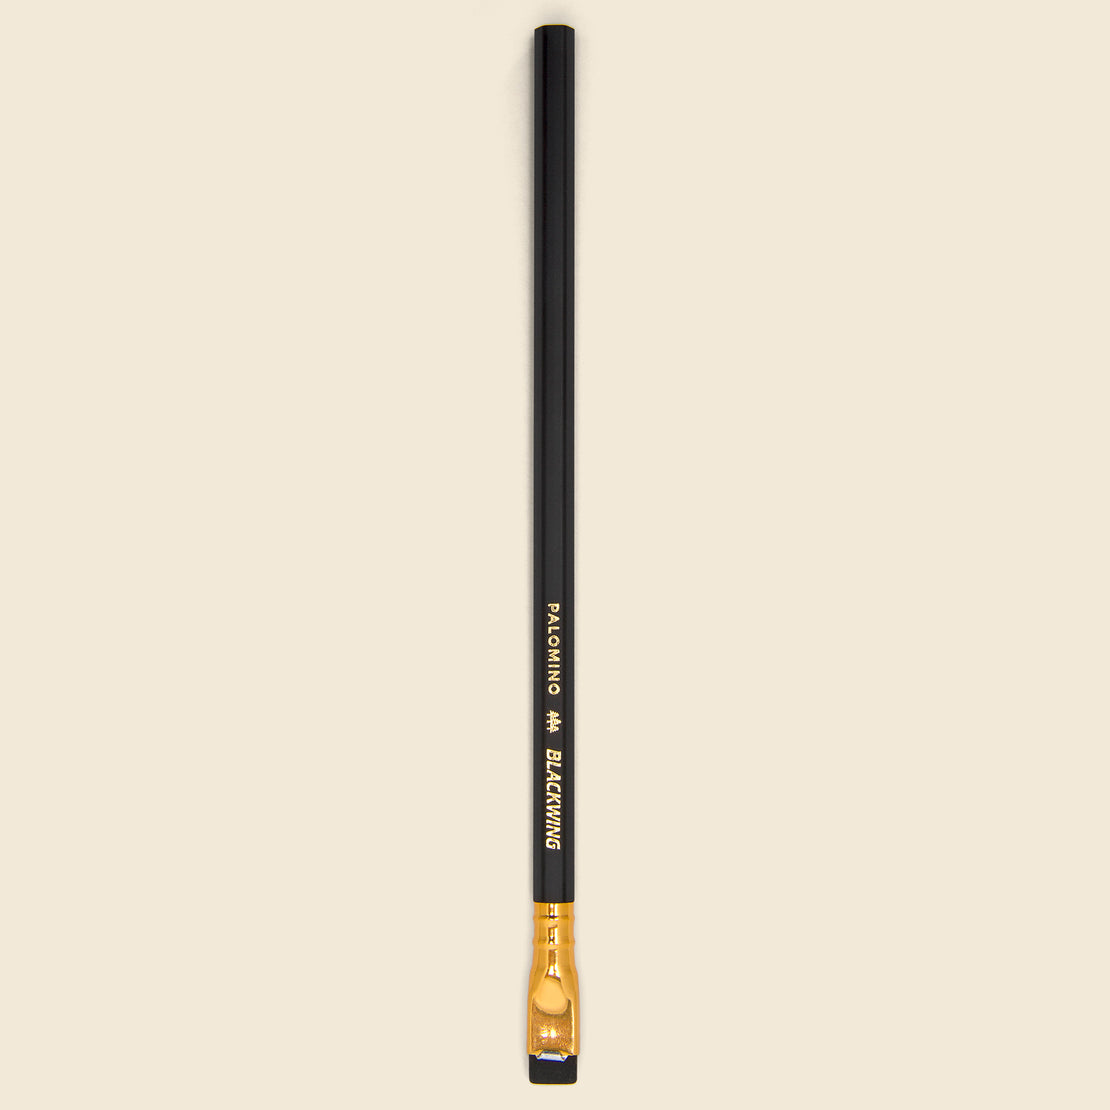 Blackwing Pencils - Black & Gold - Paper Goods - STAG Provisions - Gift - Stationery